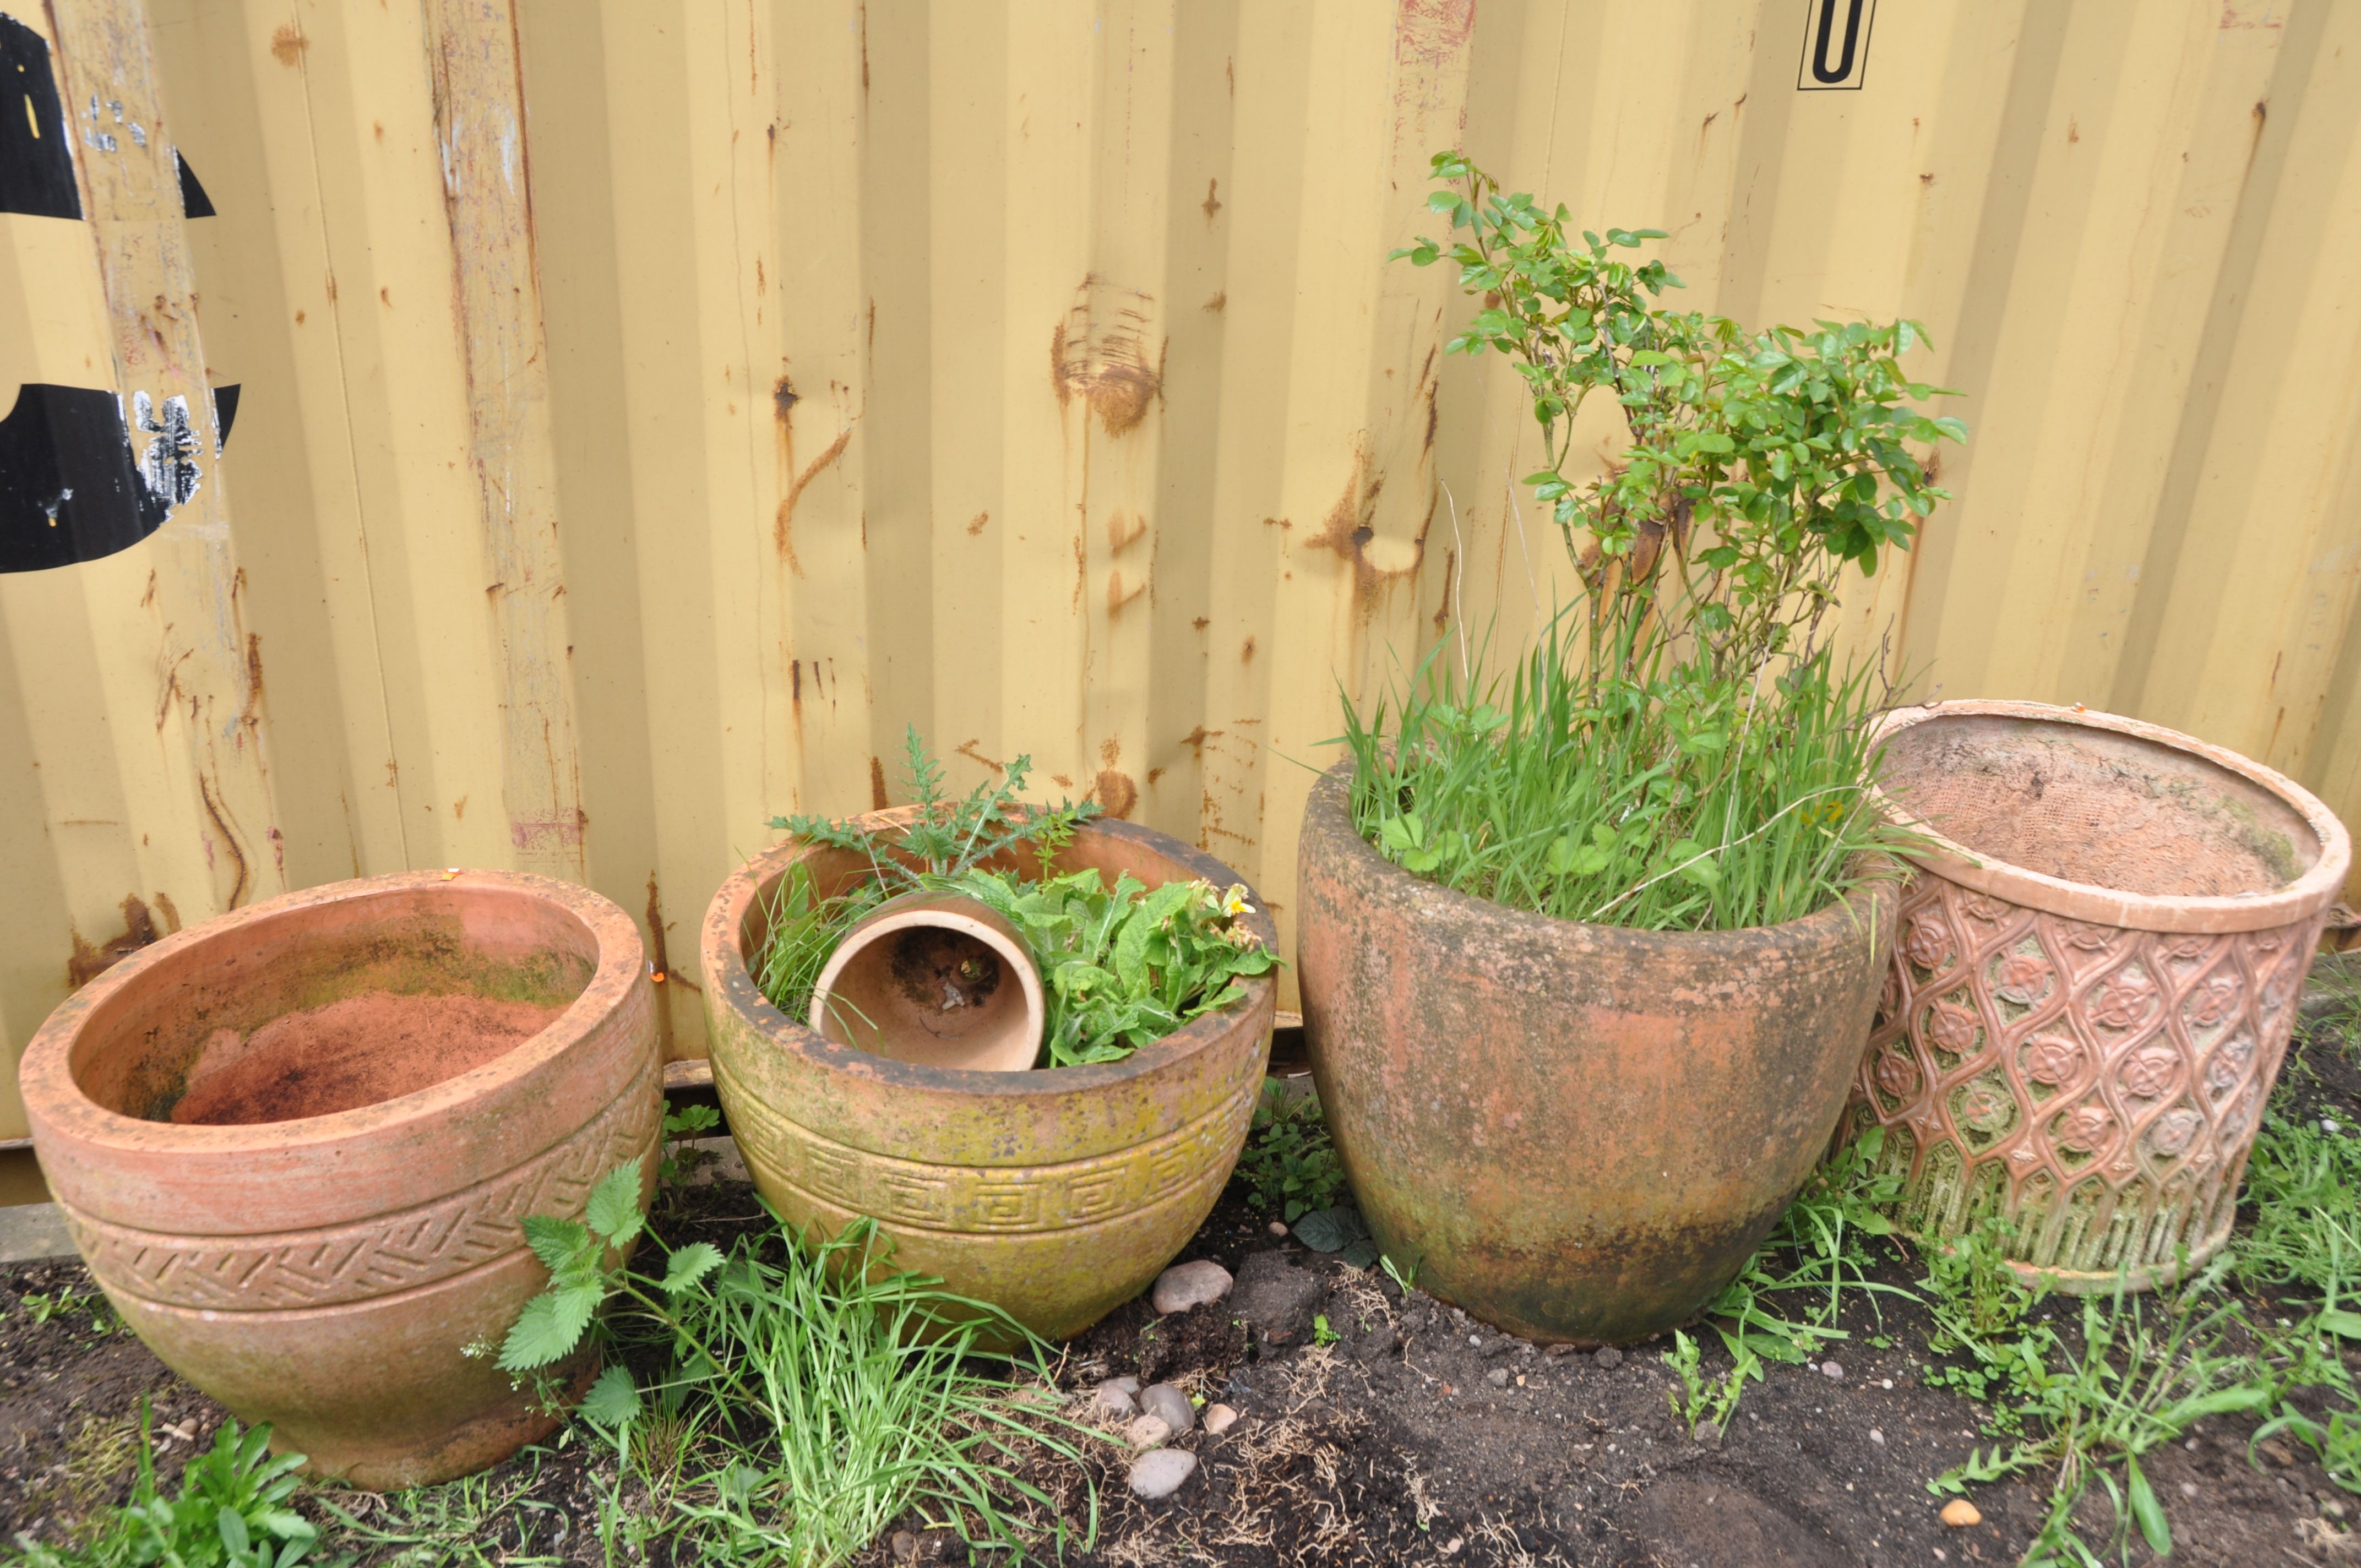 A SELECTION OF WEATHERED TERRACOTTA POTS comprising three circular terracotta pots and a smaller